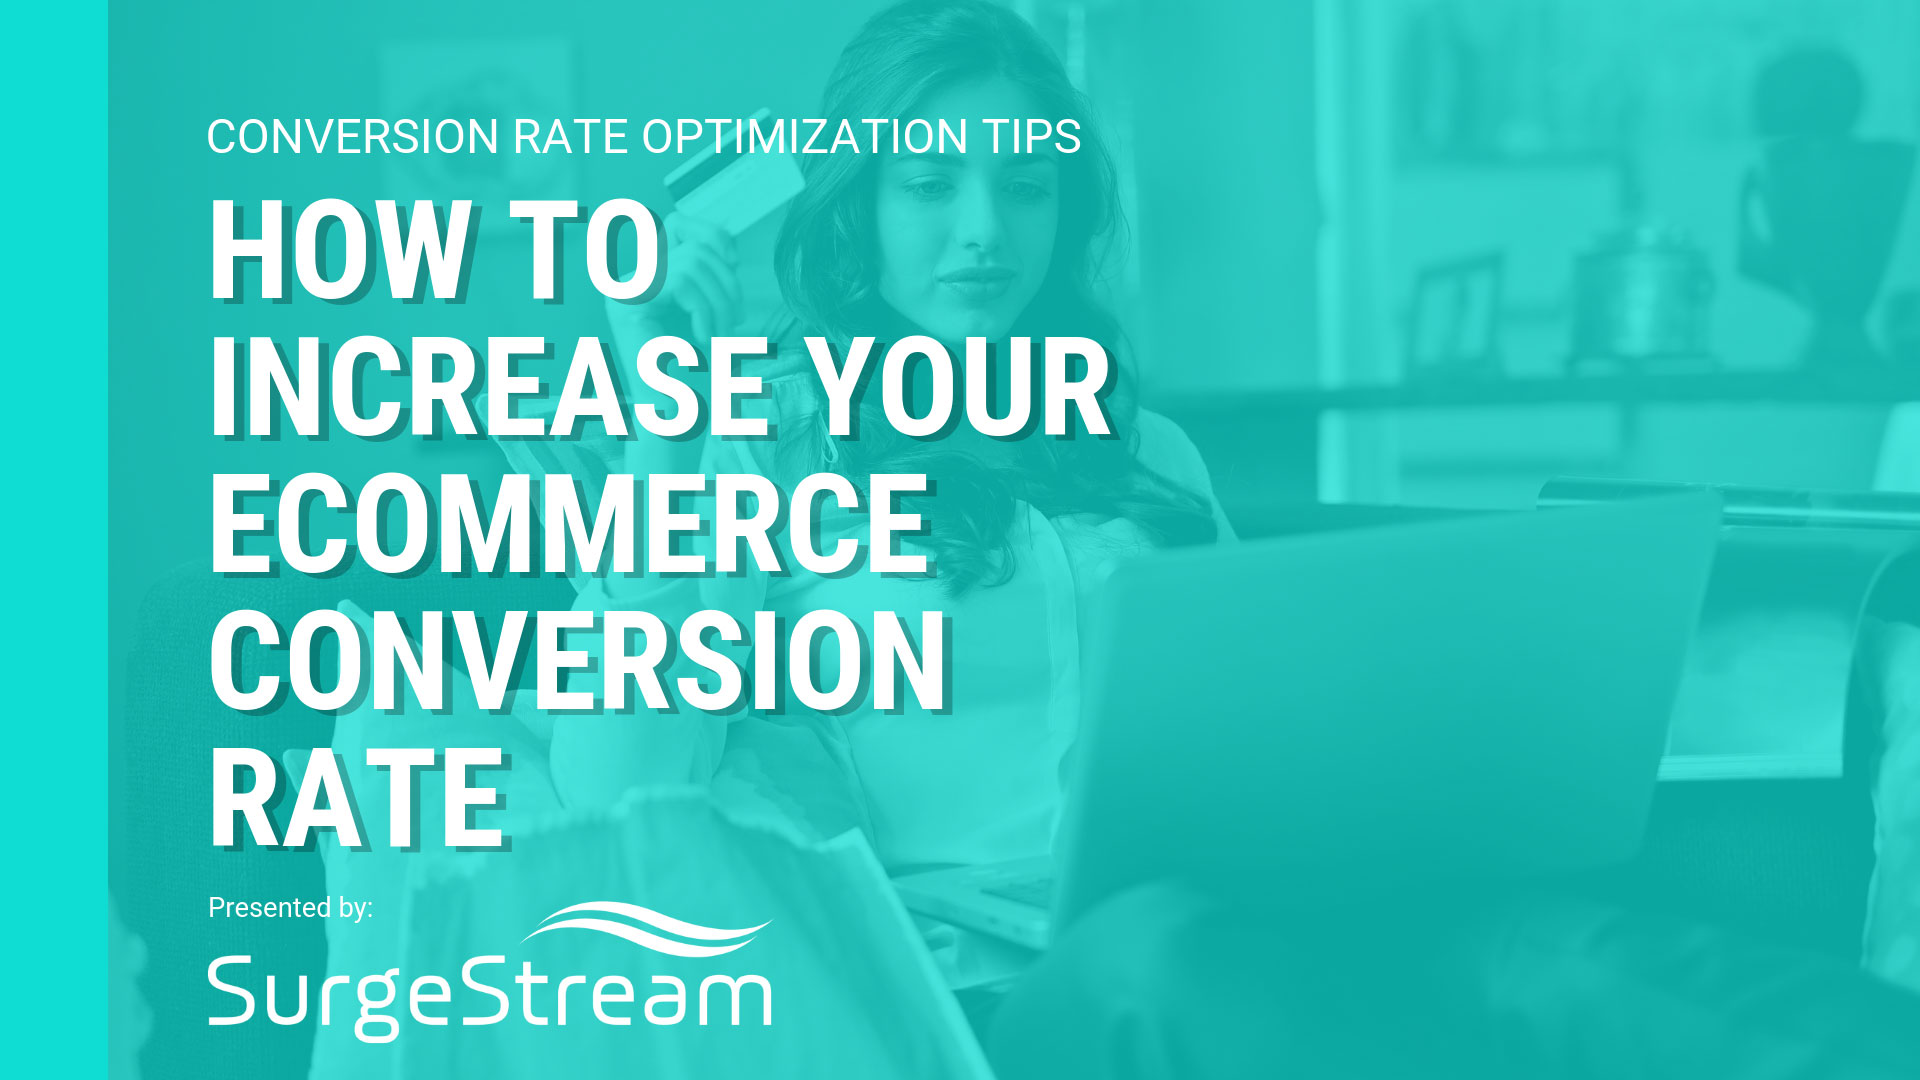 Tips To Increase Conversion Rate For Ecommerce